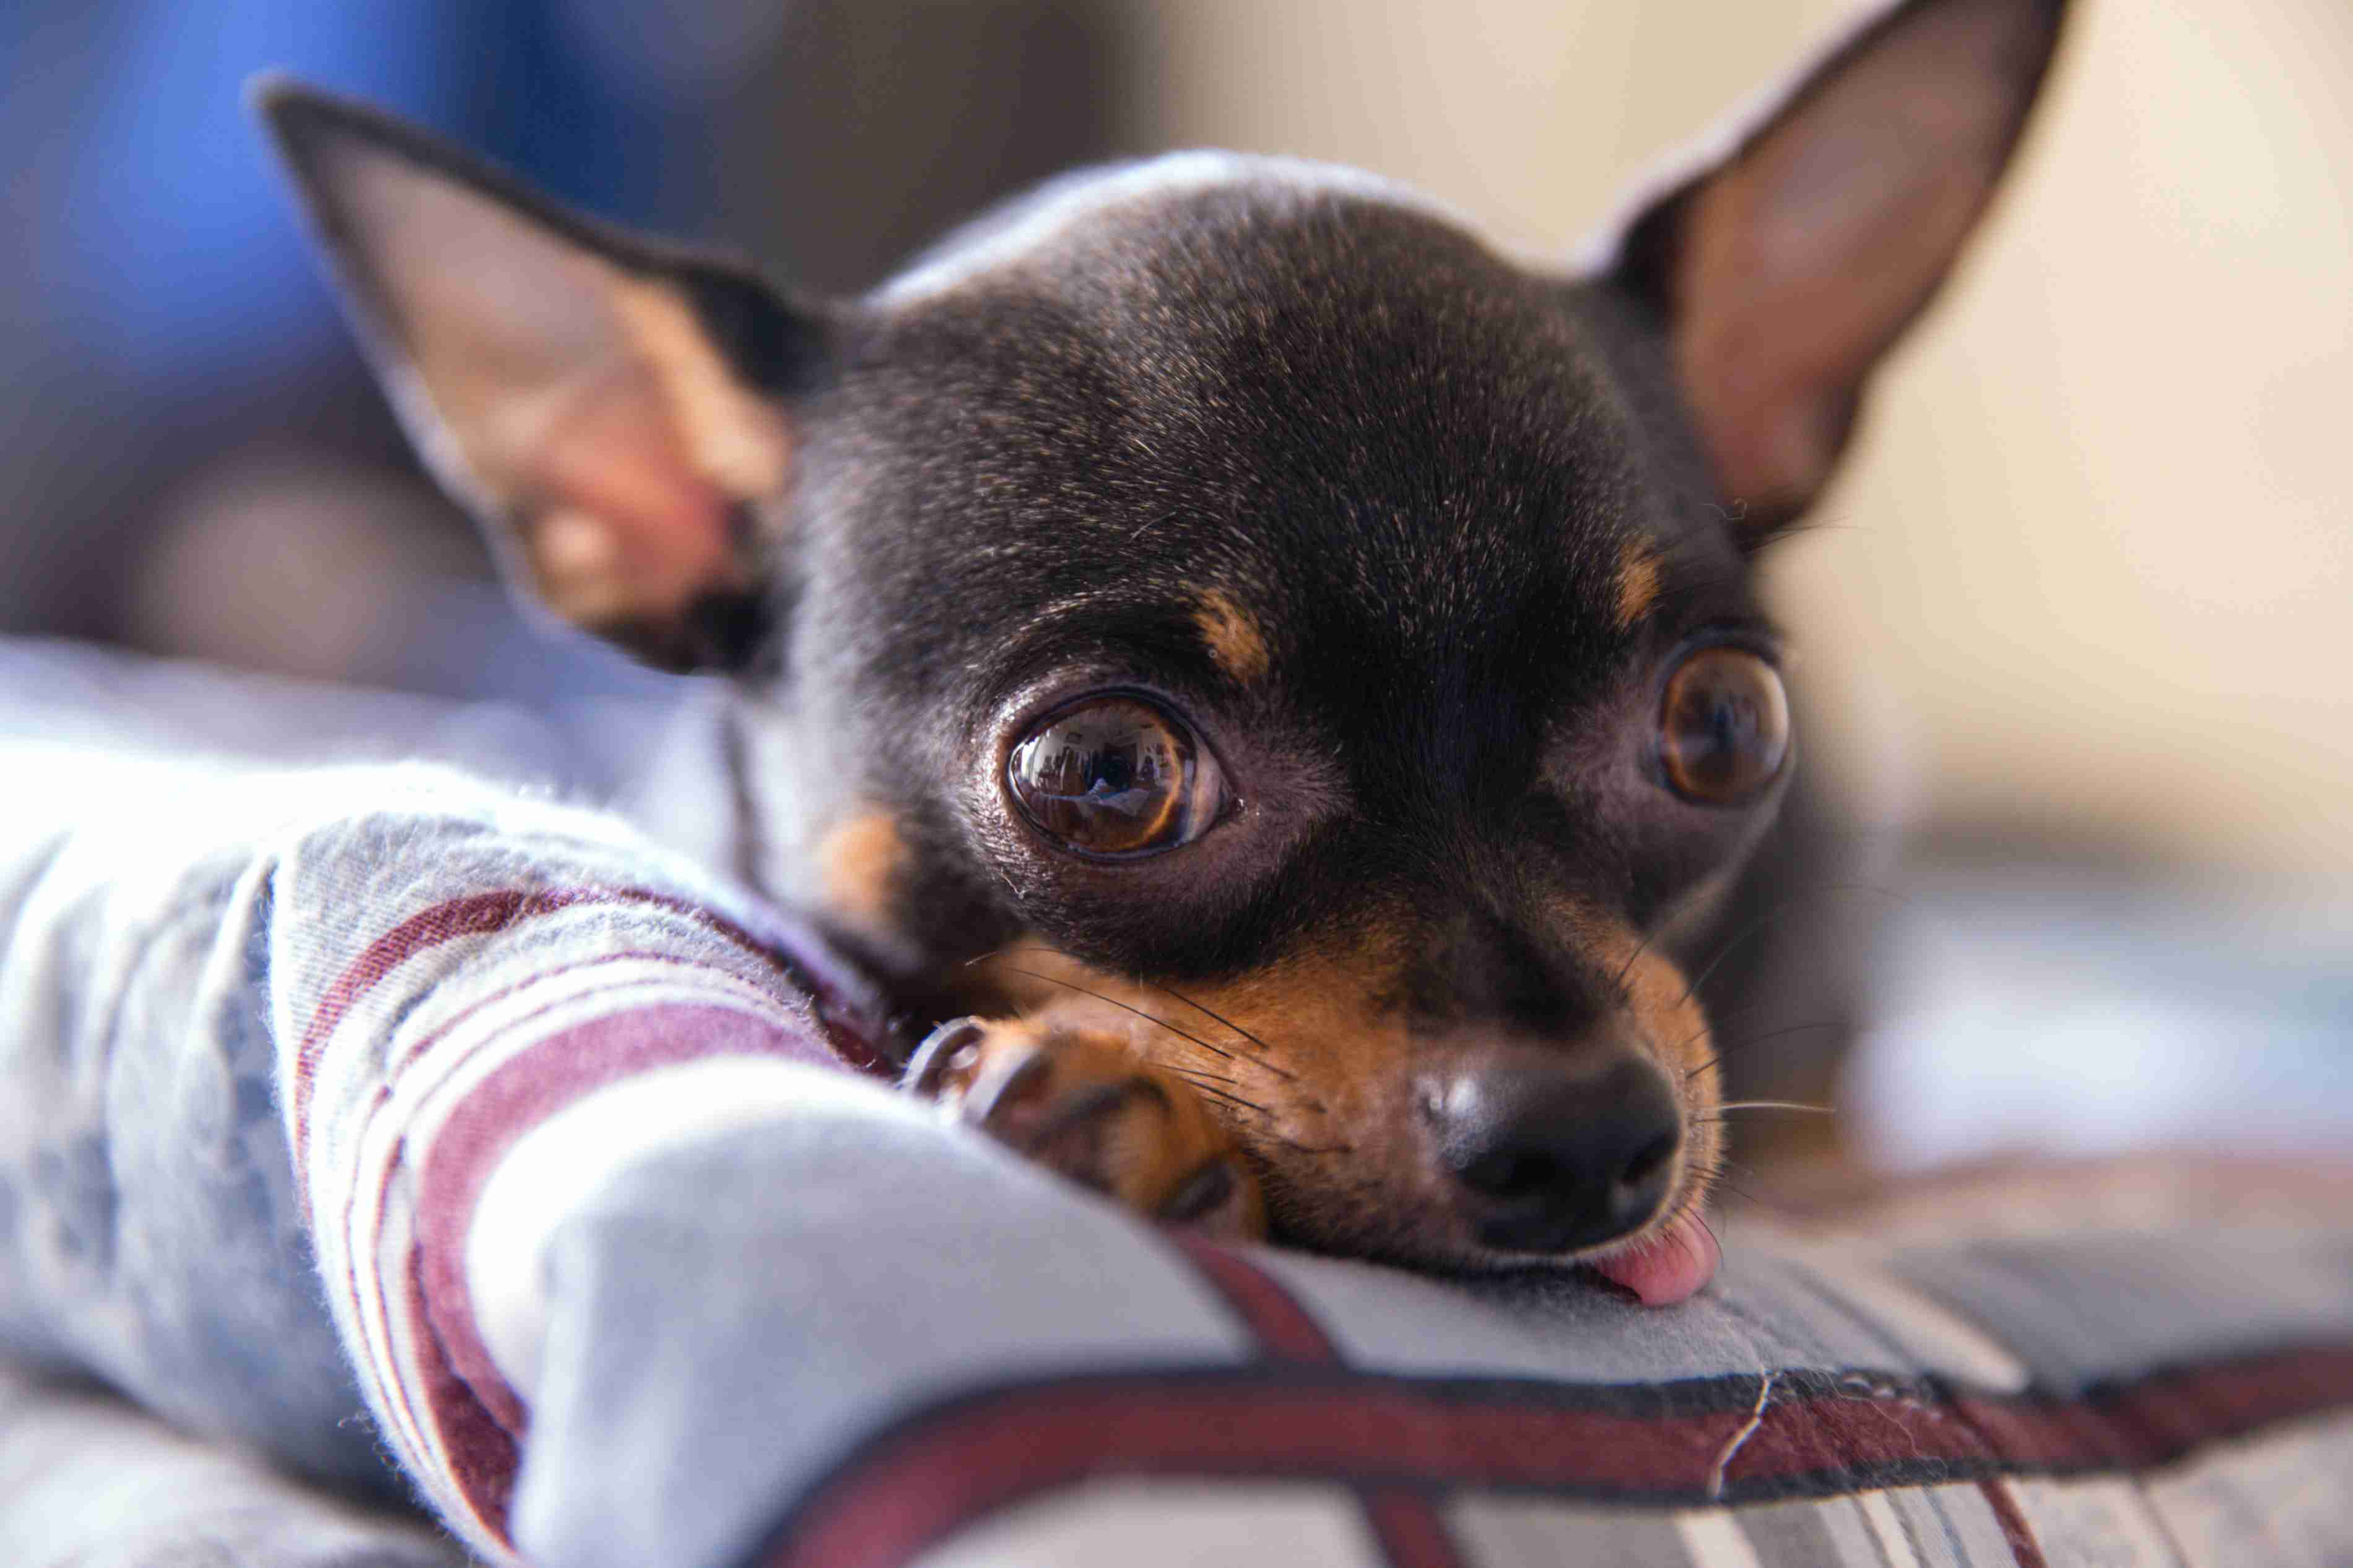 How can you help a Chihuahua feel more secure and less prone to anger?